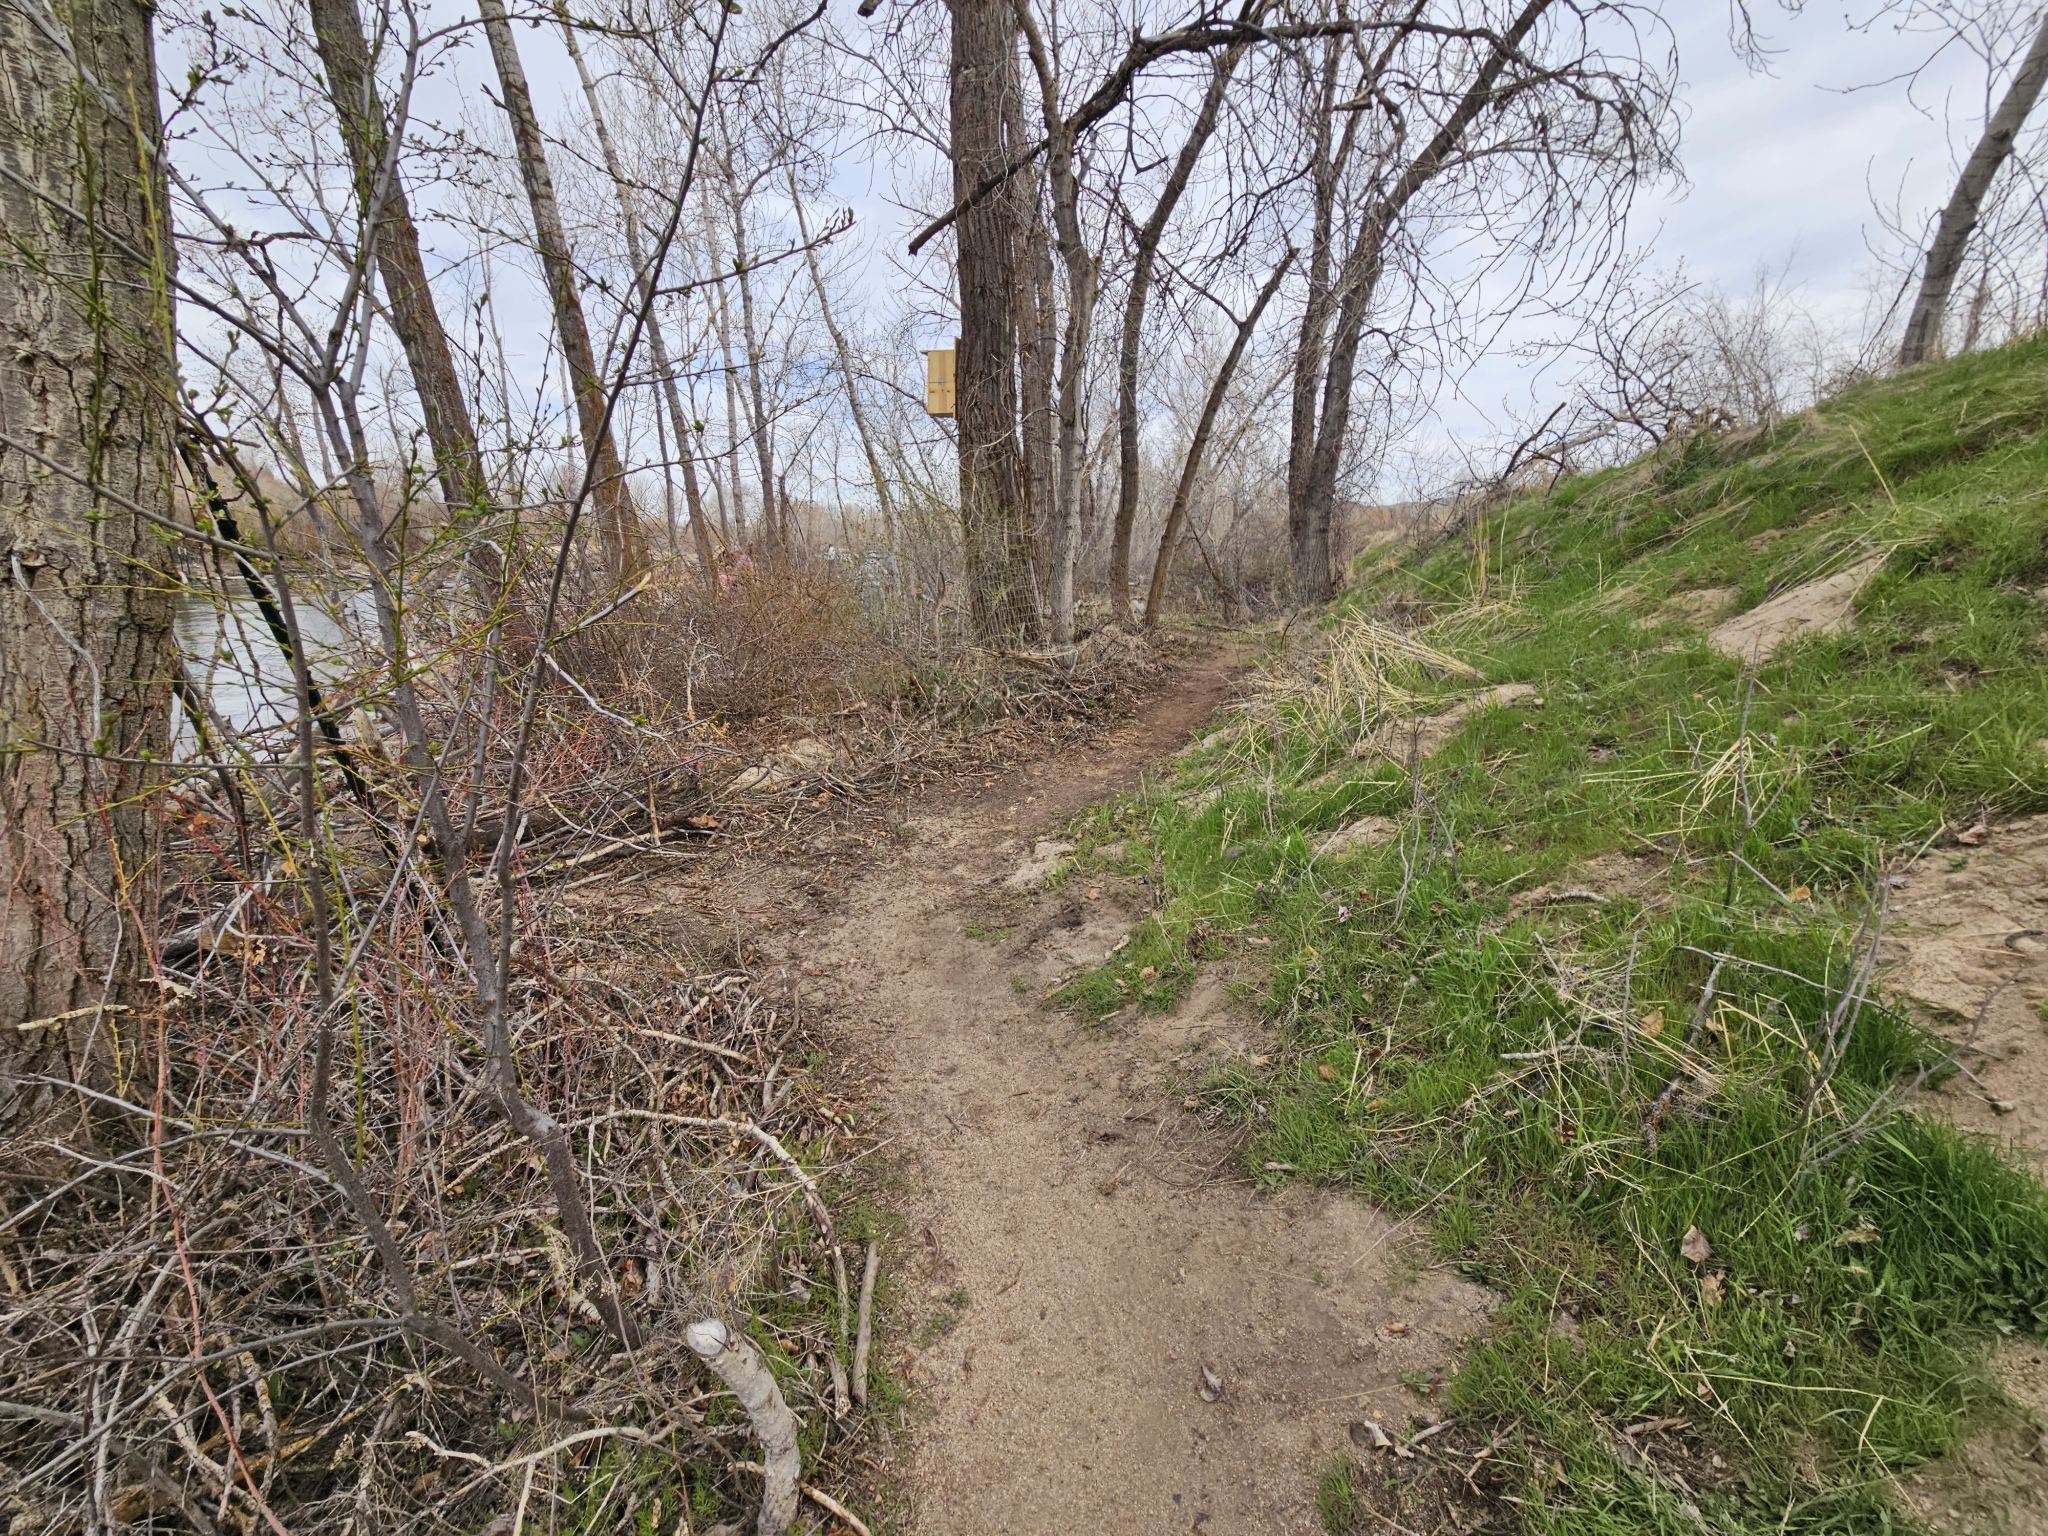 a new trail winds past a green hillside and tangled wild rose bushes.